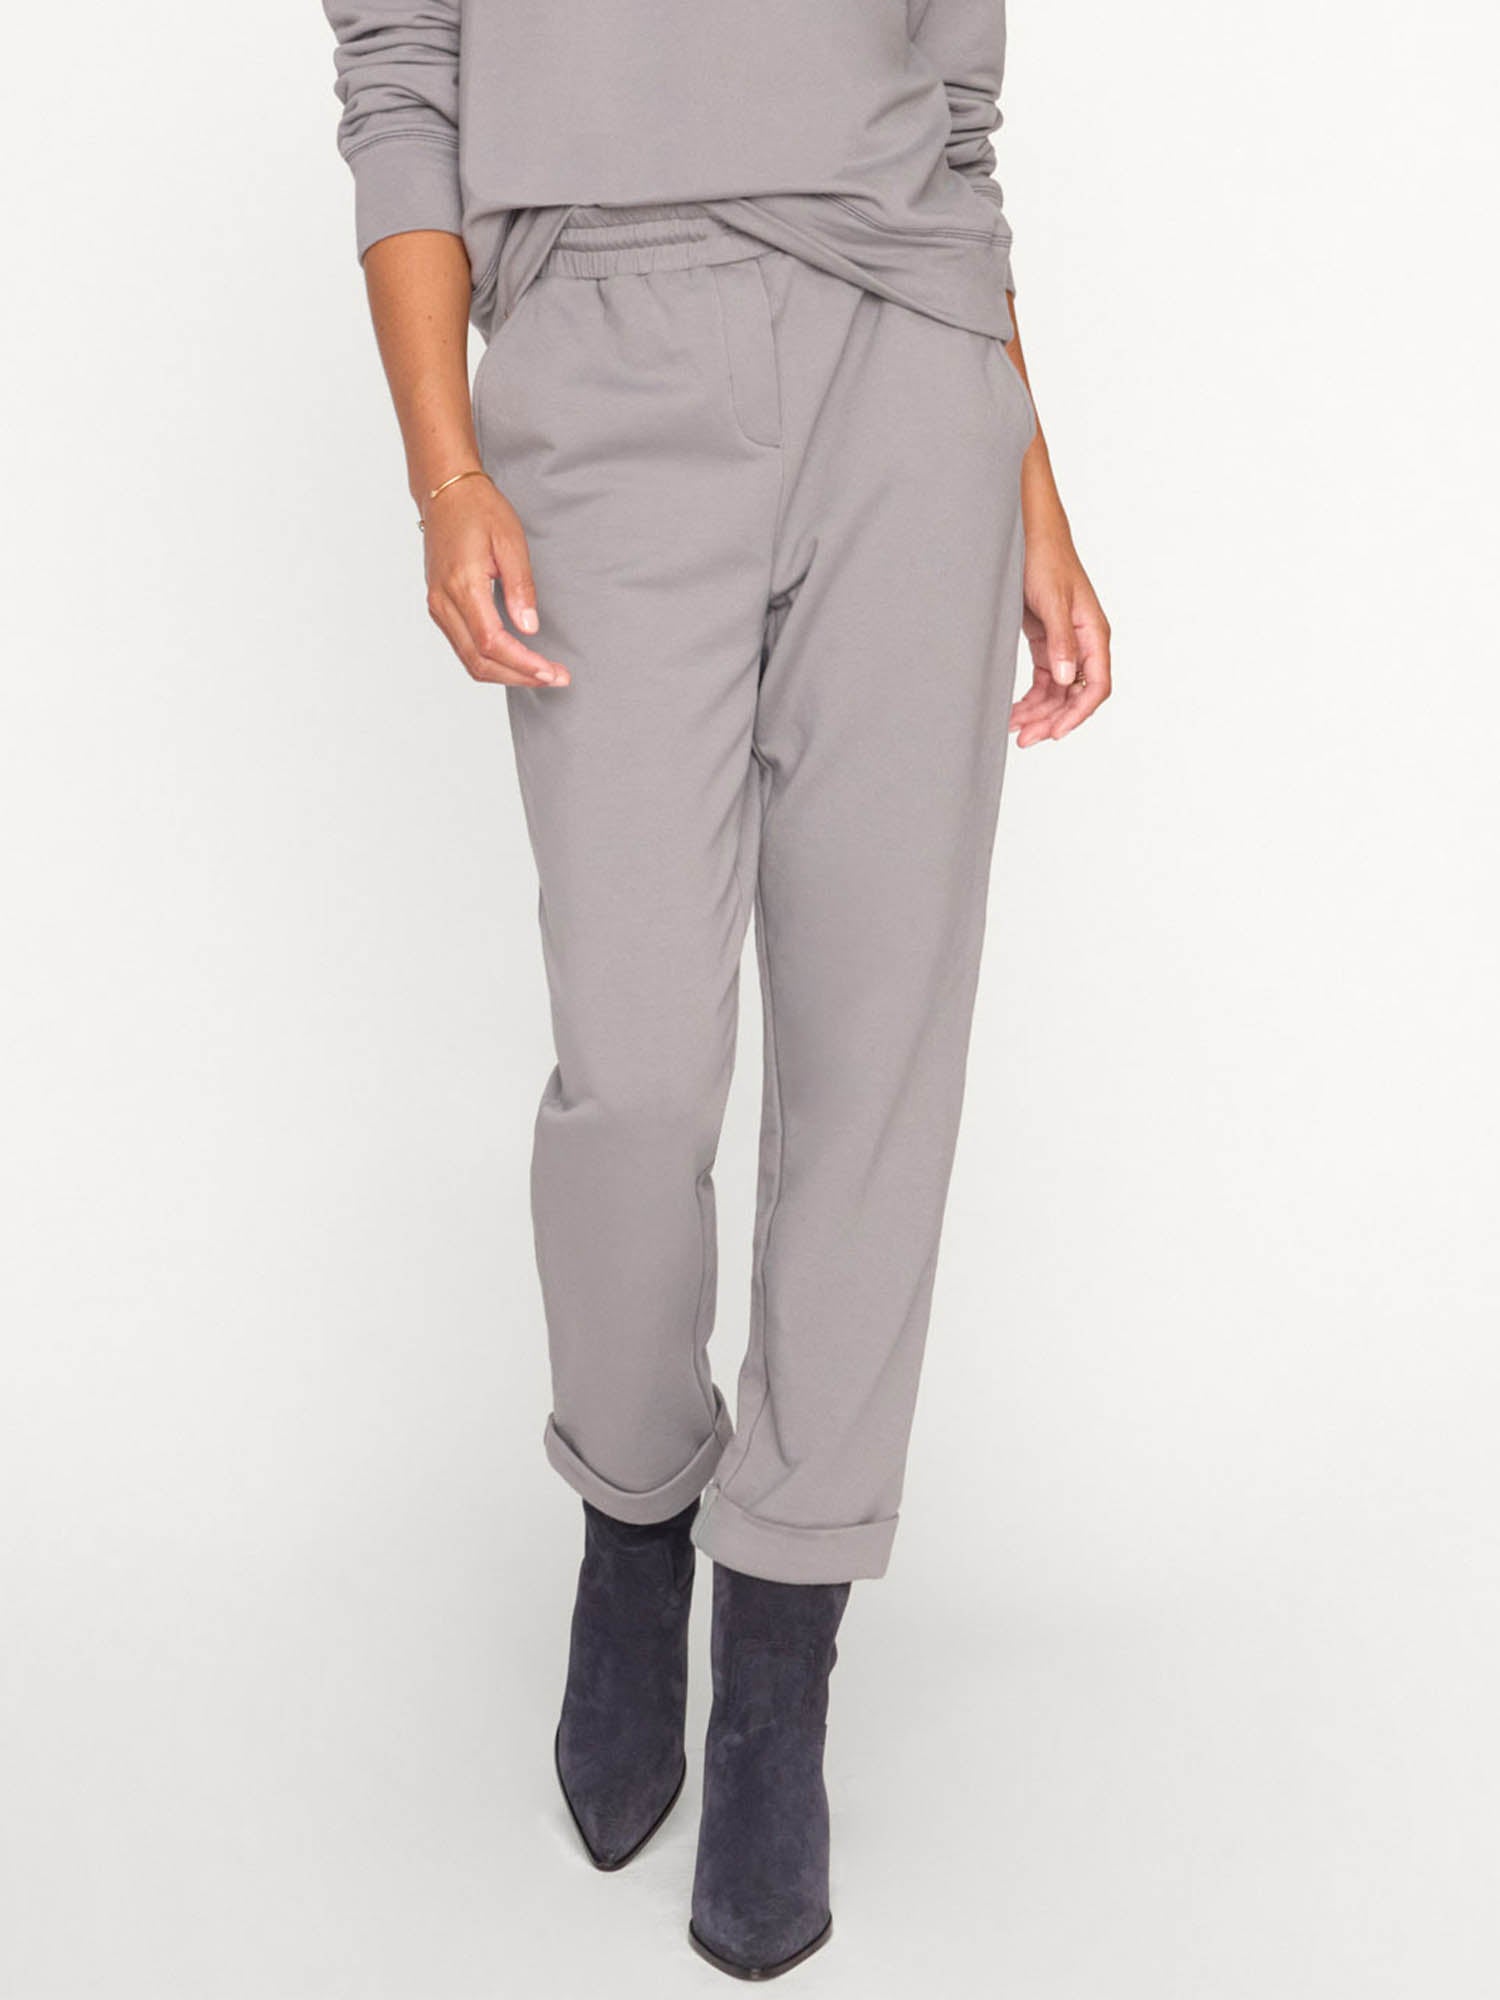 Penn French Terry grey ankle pant front view